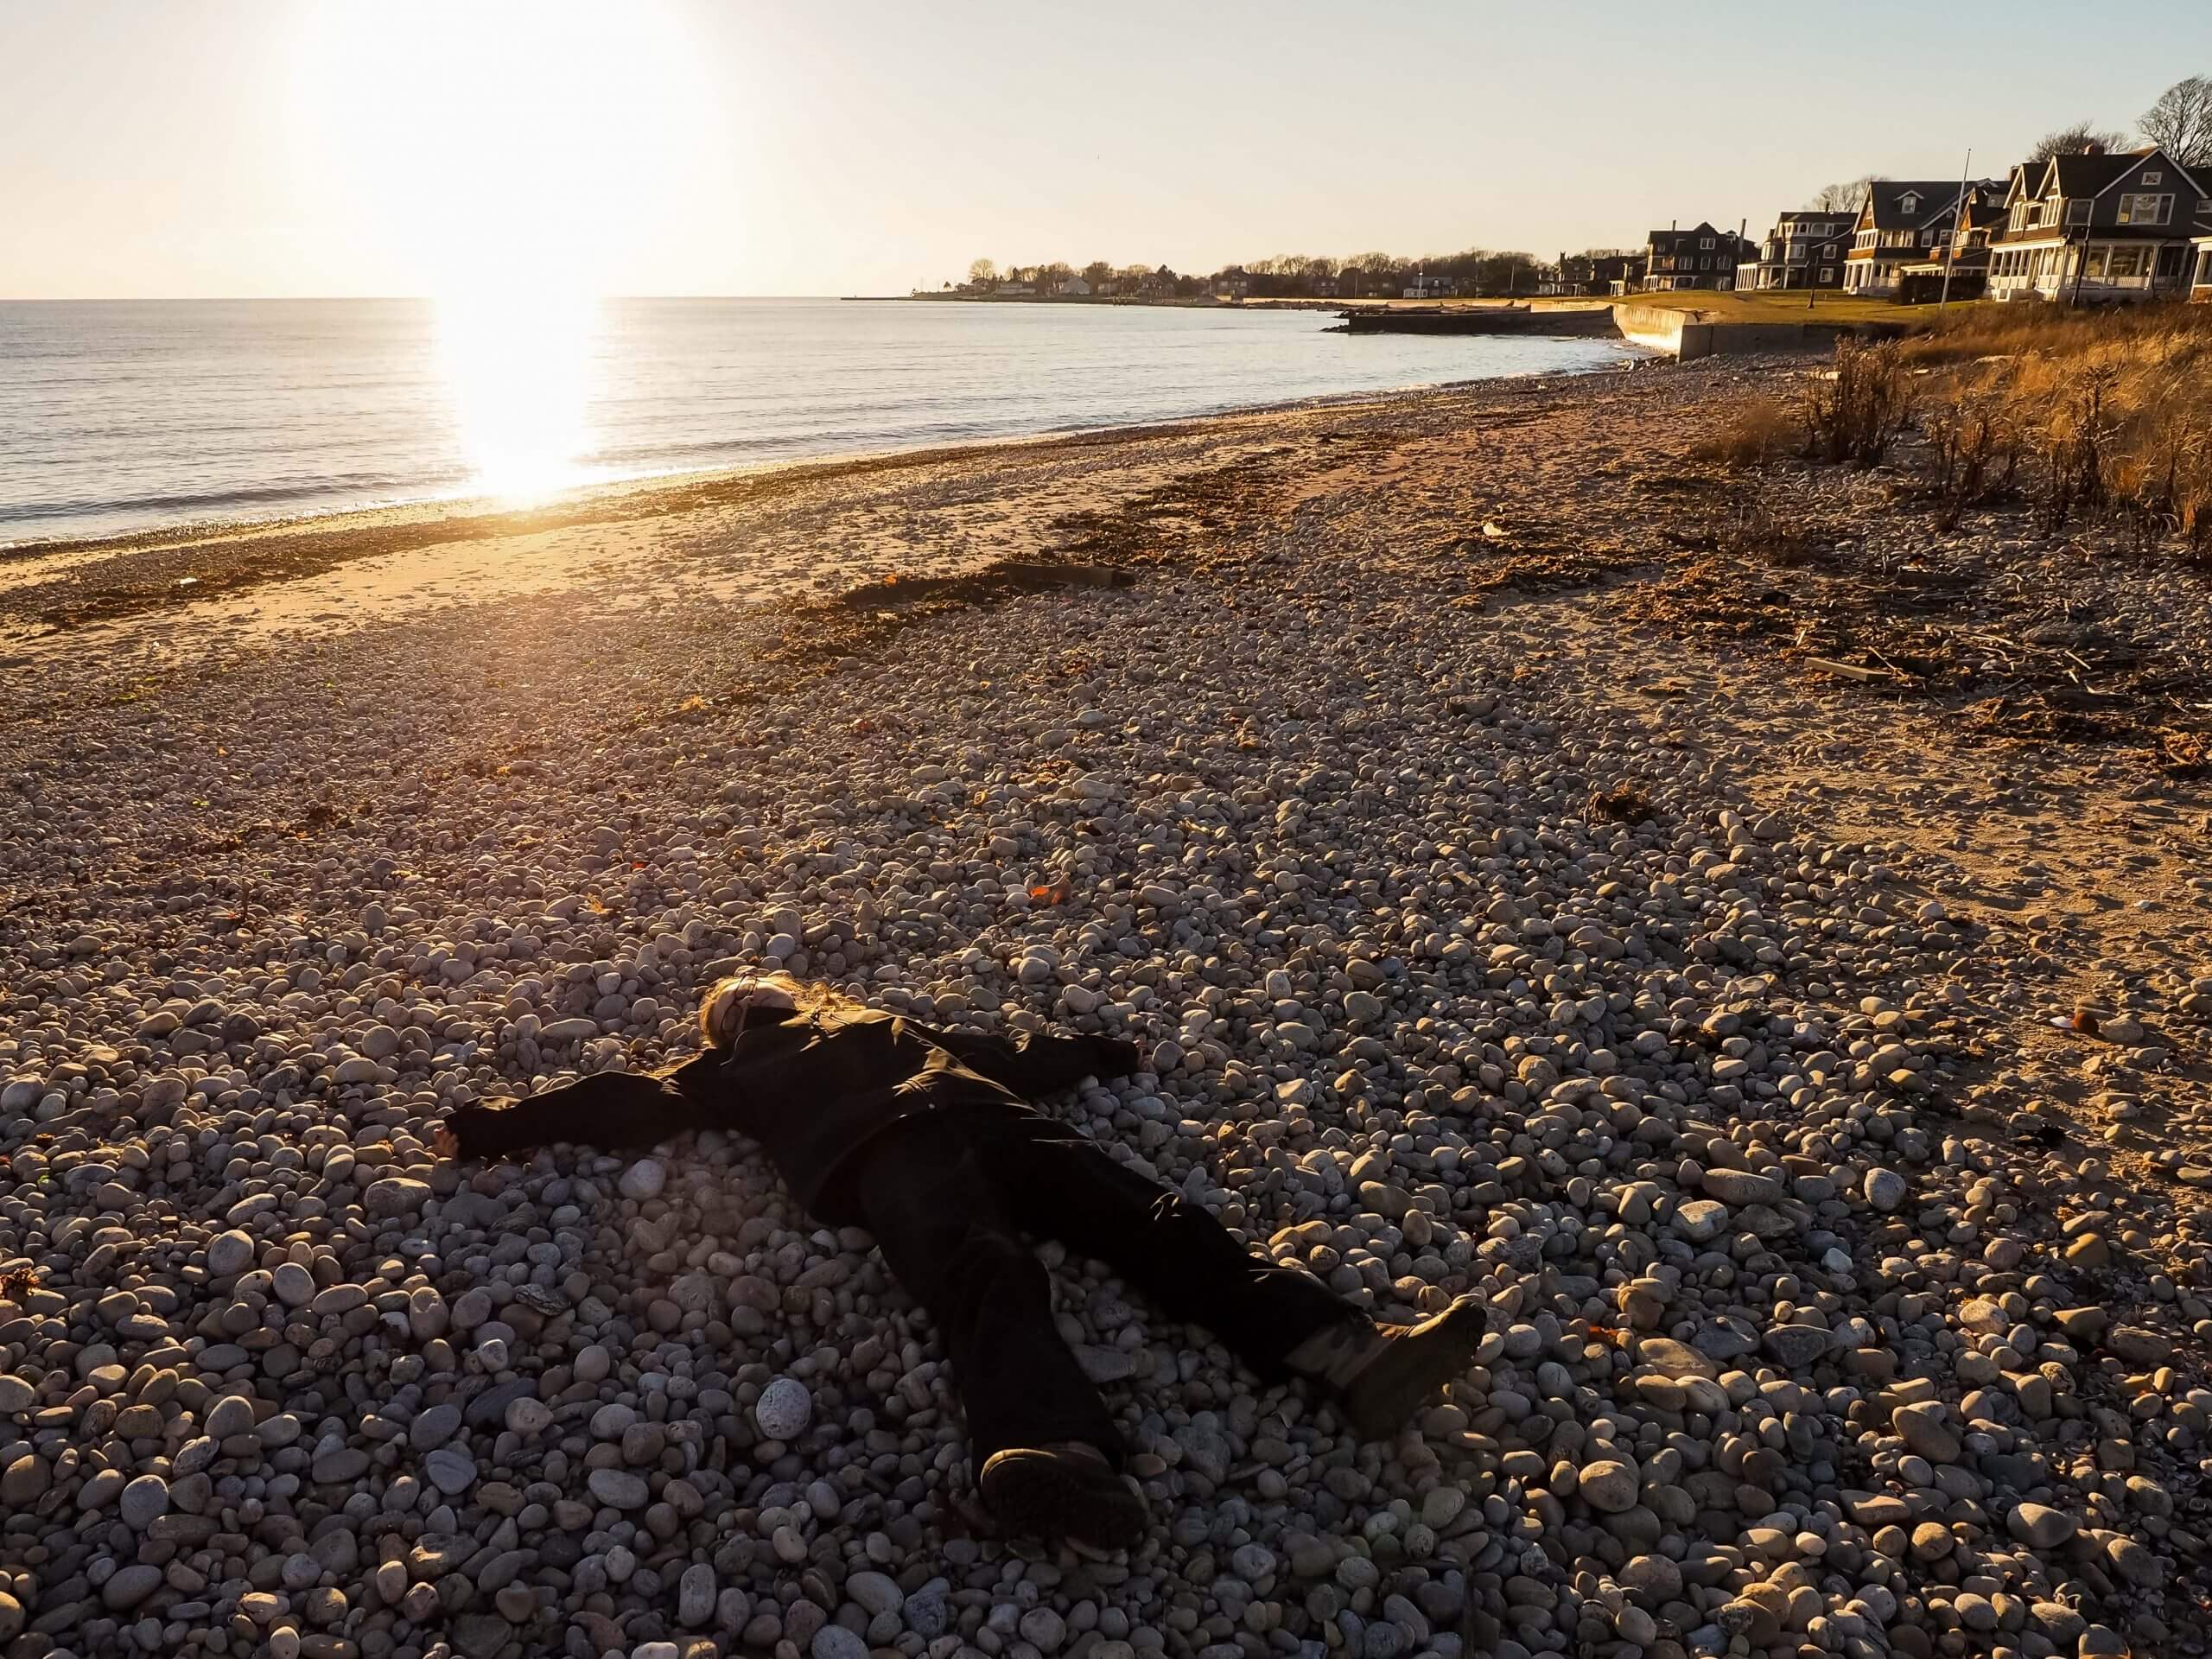 A person lays outstretched on the pebbled surface of a beach. The sun shines brightly.